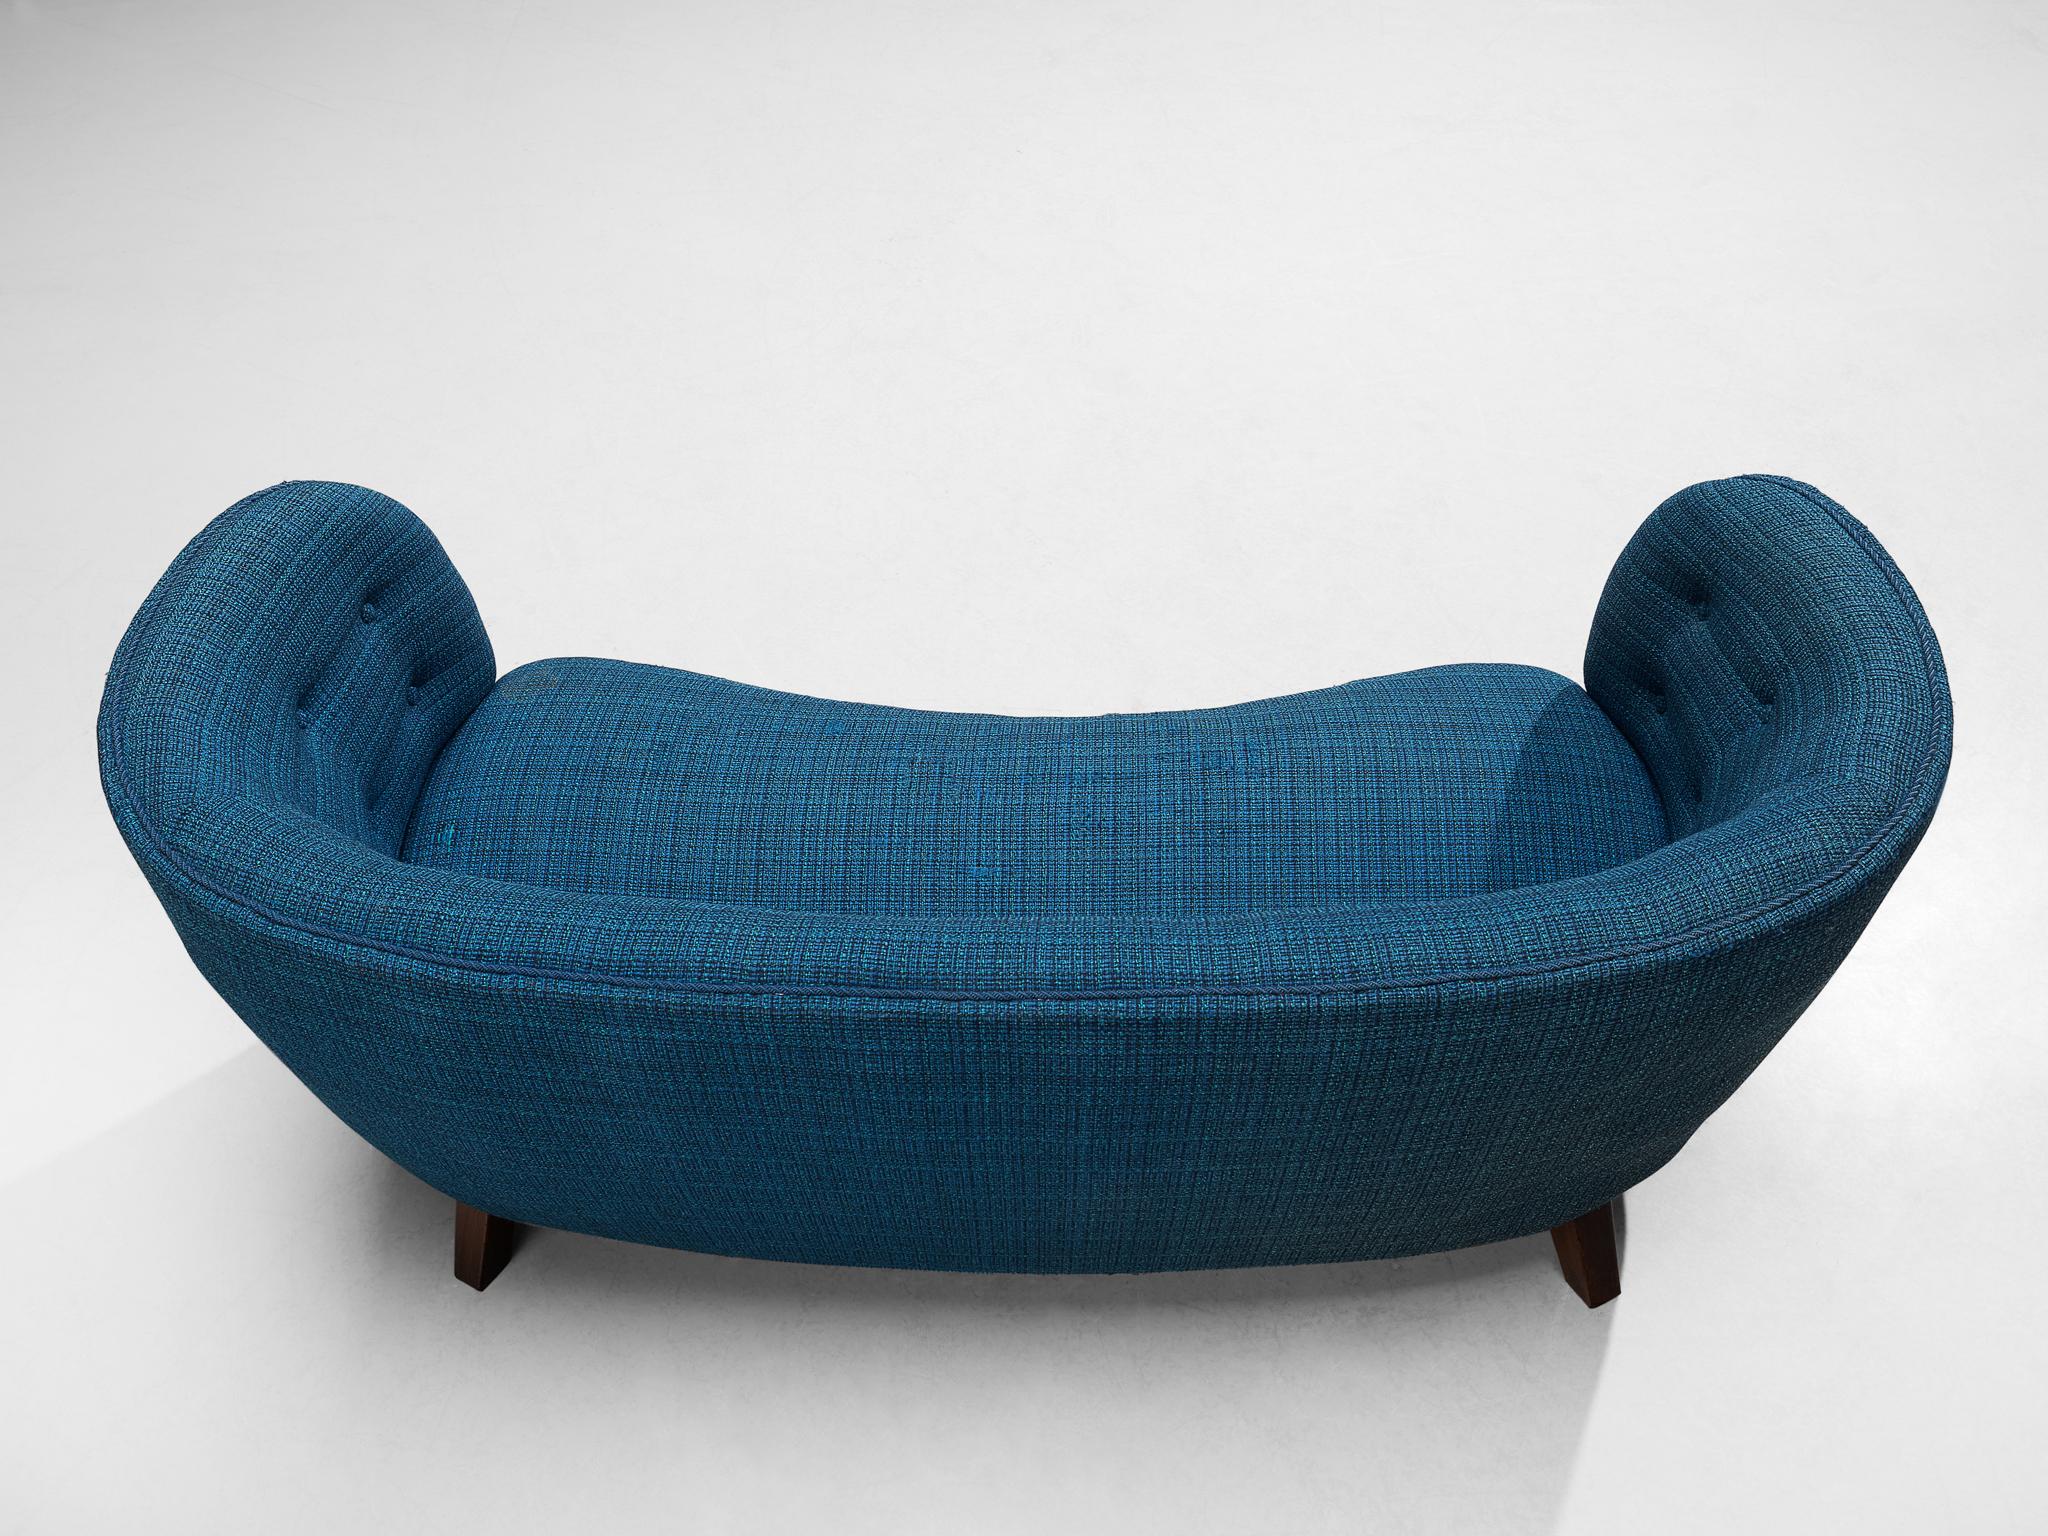 Mid-20th Century Danish Banana Sofa in Bright Blue Tufted Upholstery For Sale